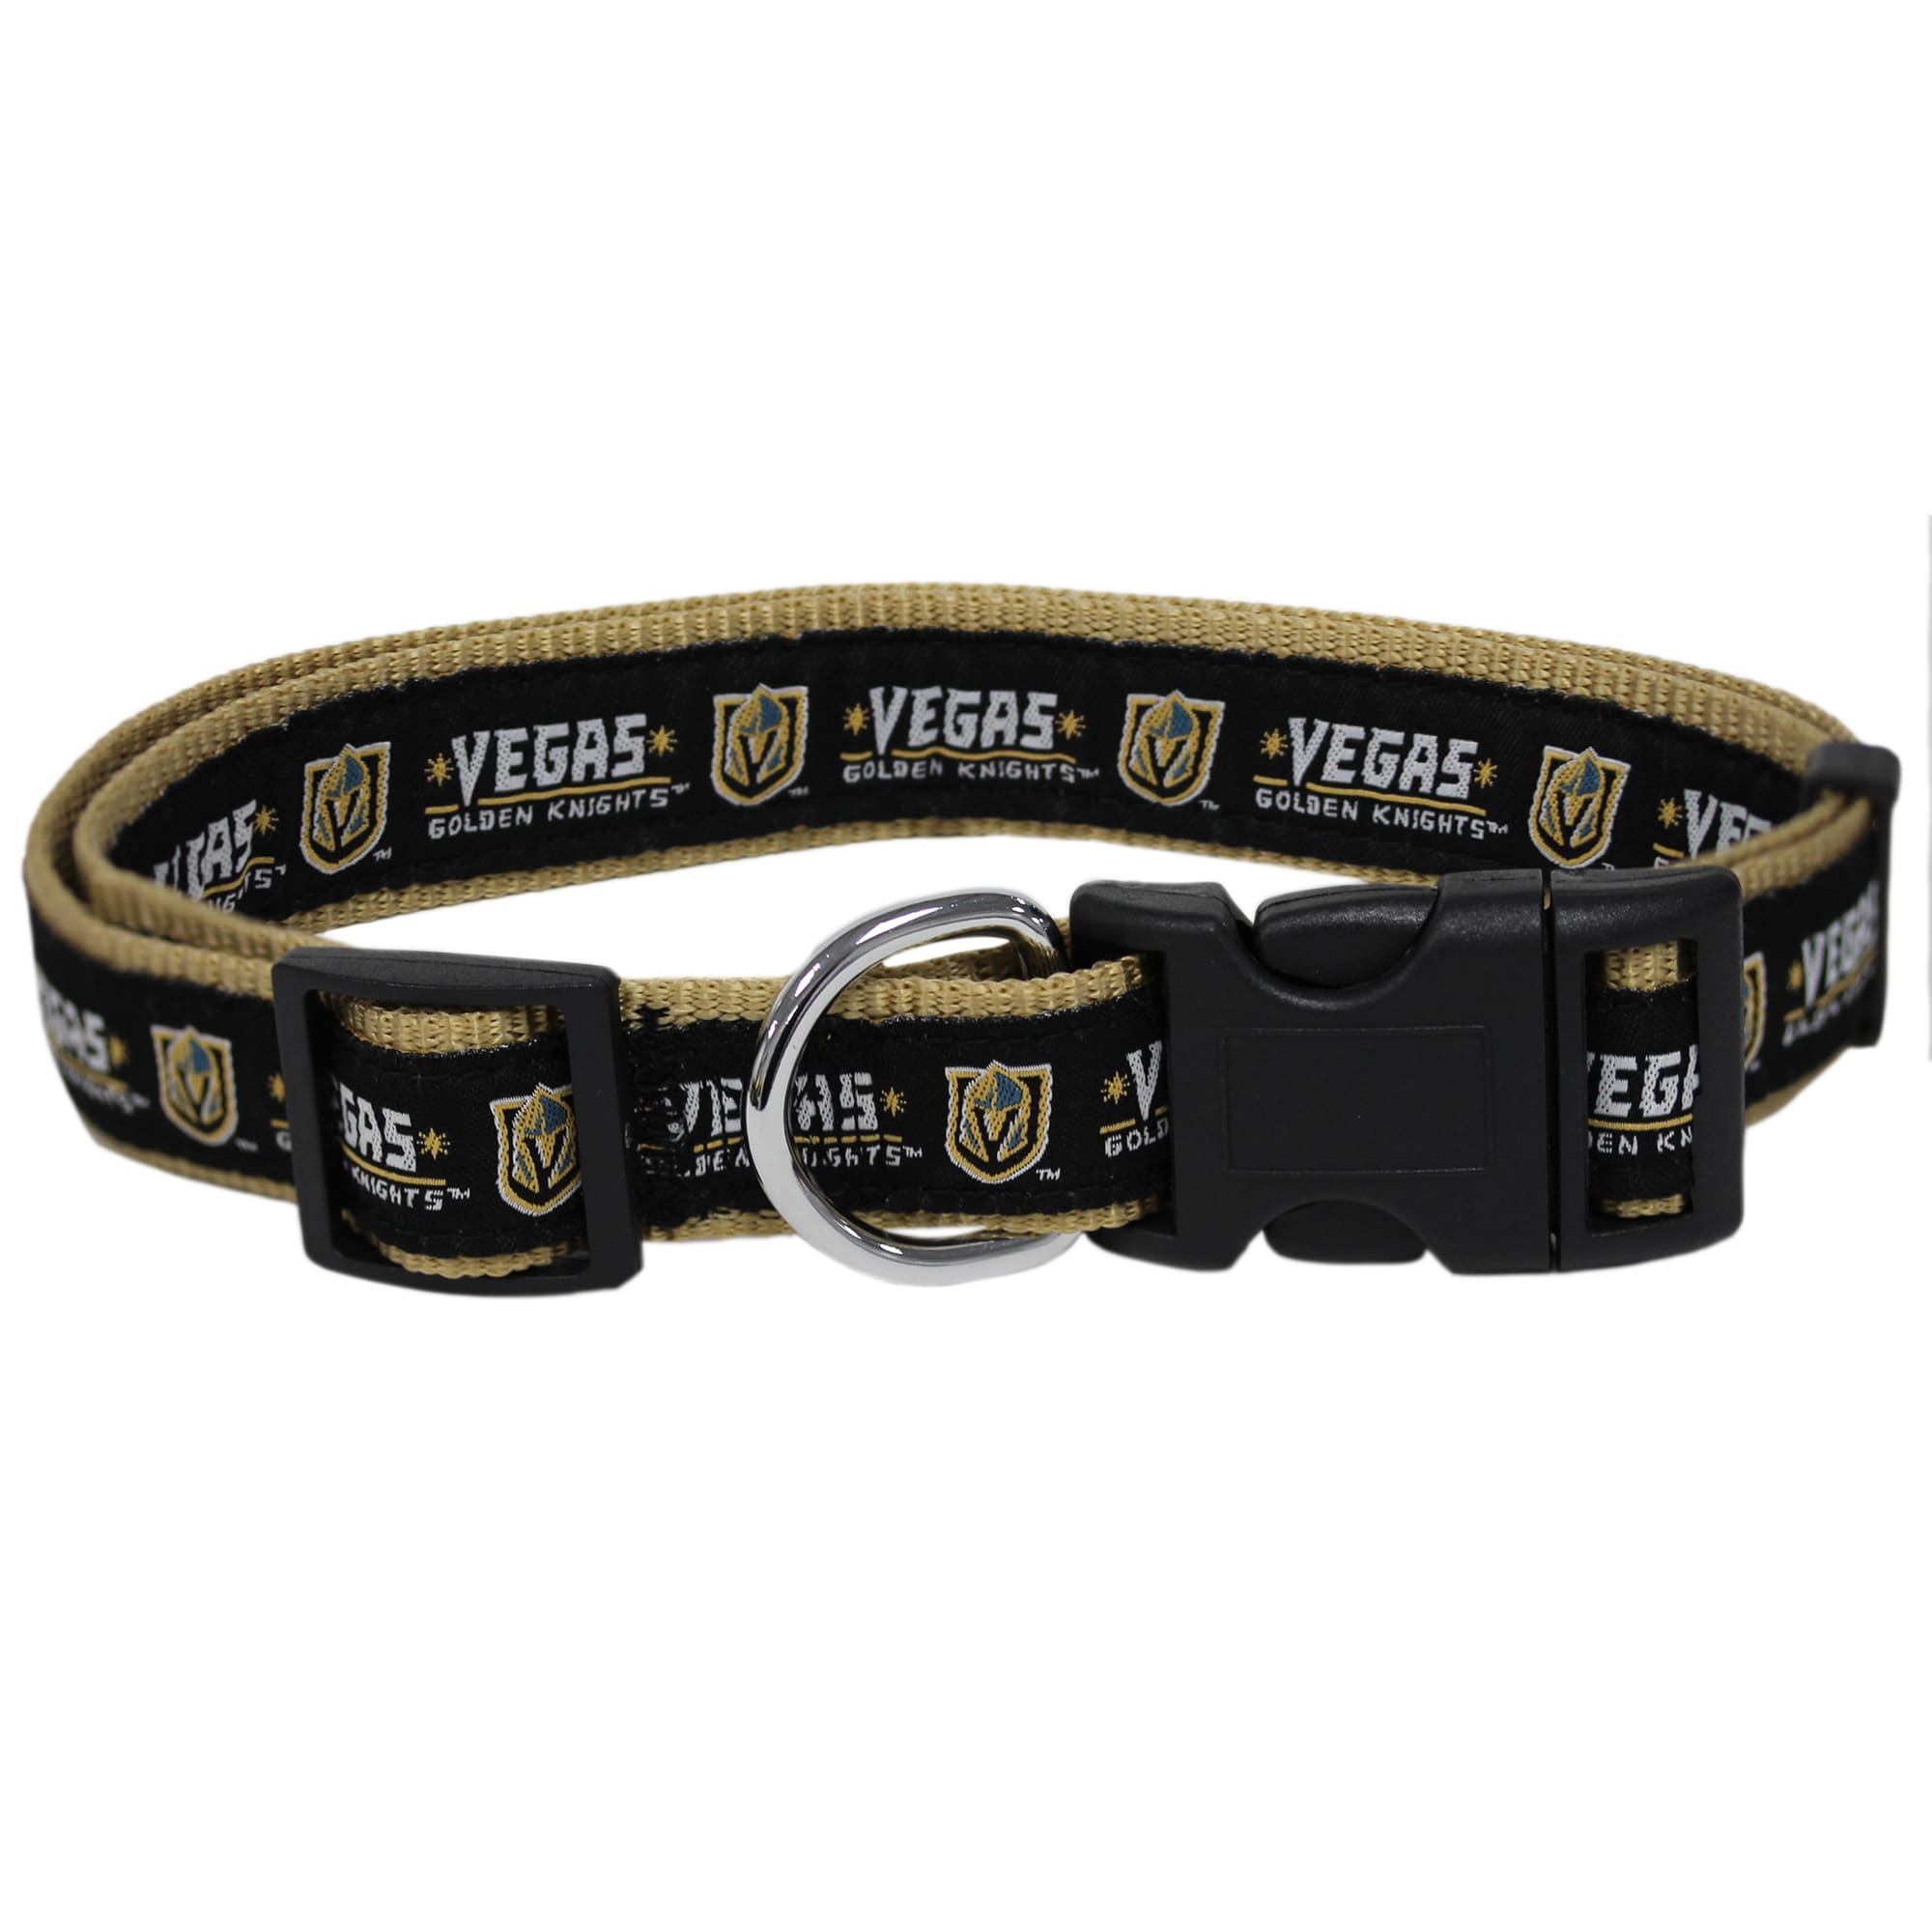 Photos - Collar / Harnesses Pets First Vegas Golden Knights Dog Collar, Large, Multi-Color 